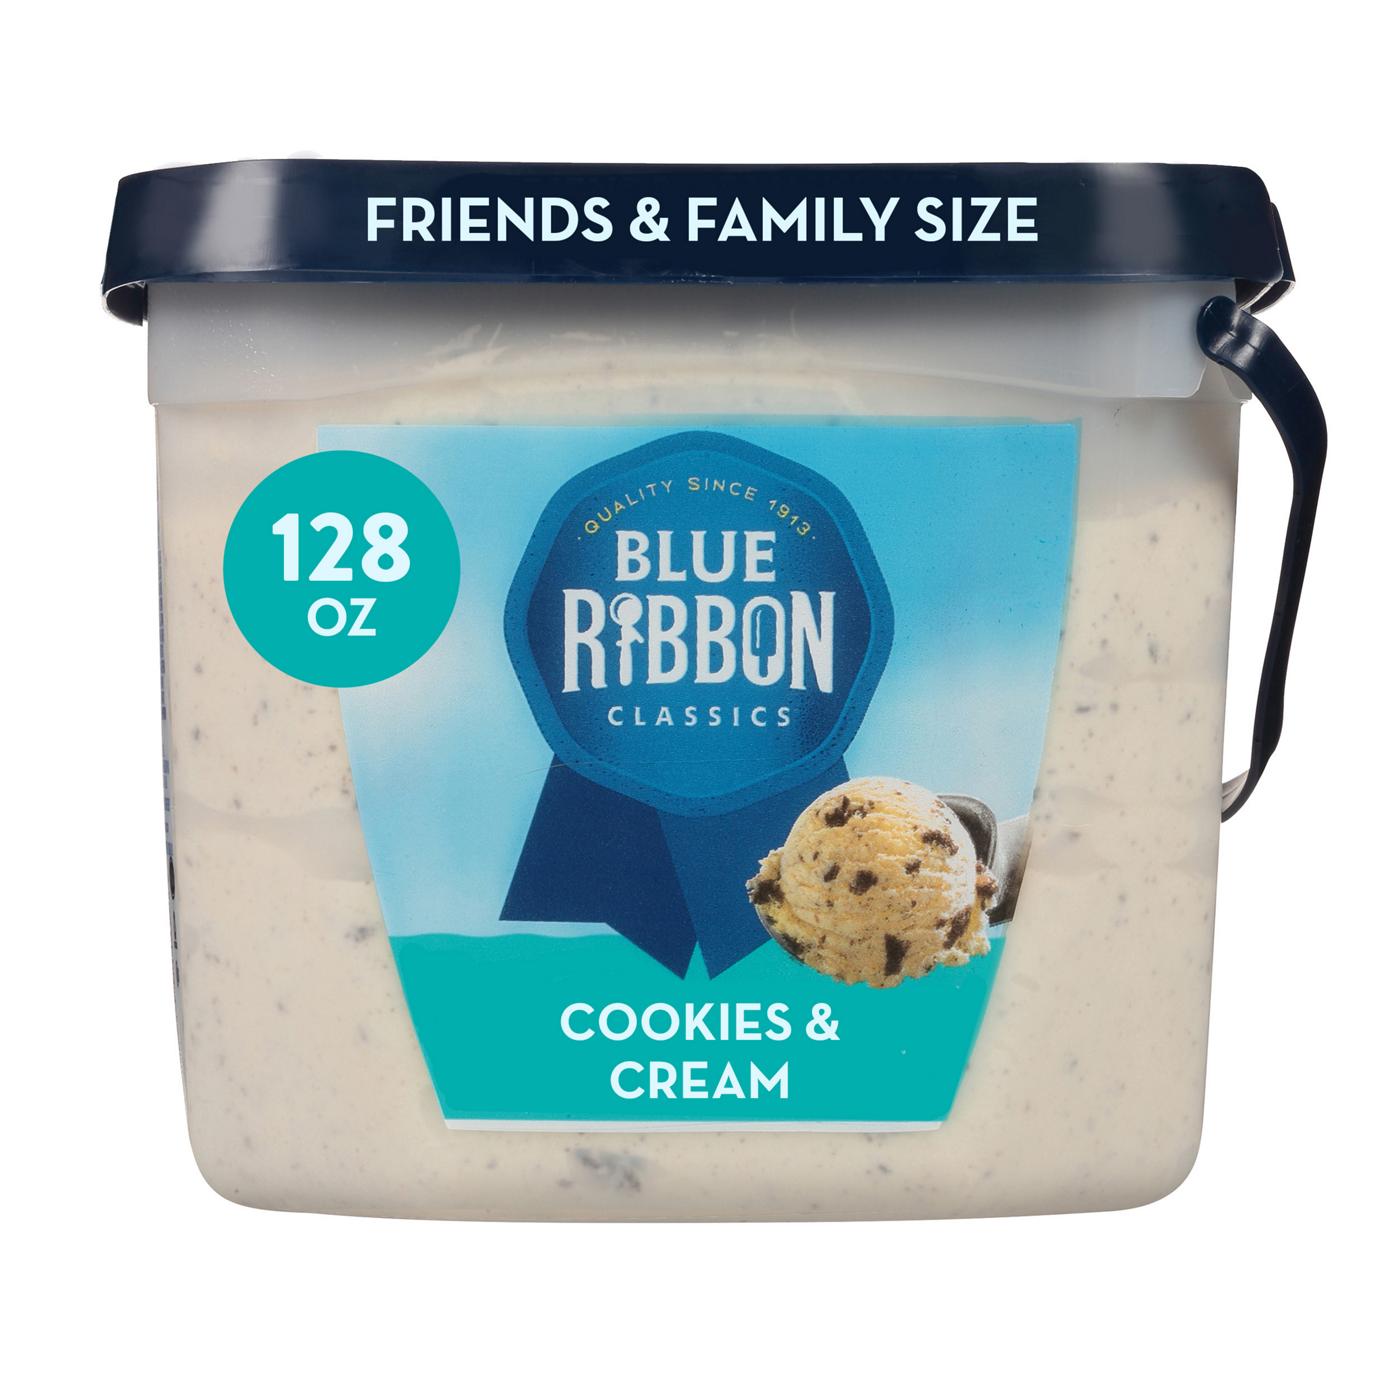 Blue Ribbon Cookies 'N Cream Ice Cream Family Size; image 1 of 2